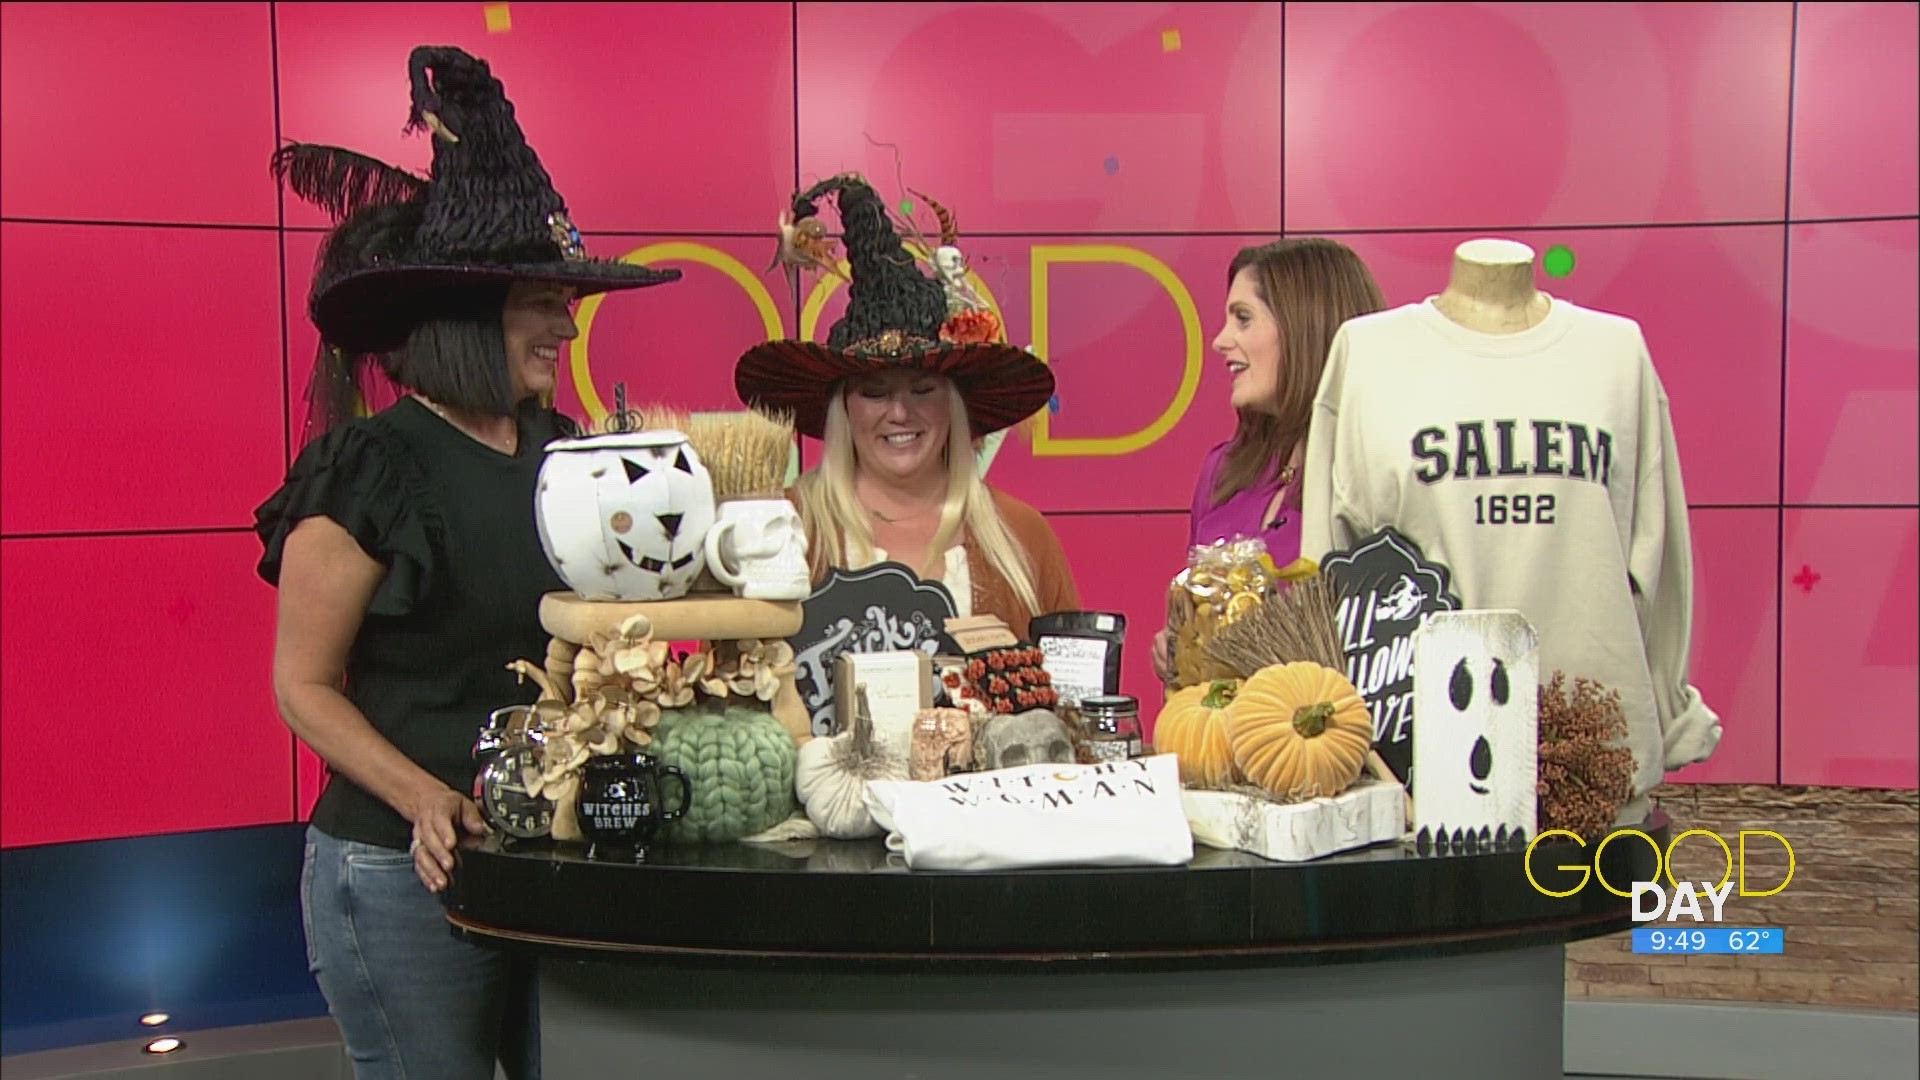 Rina Belanger and Angela Guzzardo talk the Vintage Market 'Wicked Pickin'' event where you can get plenty of fall decorations.